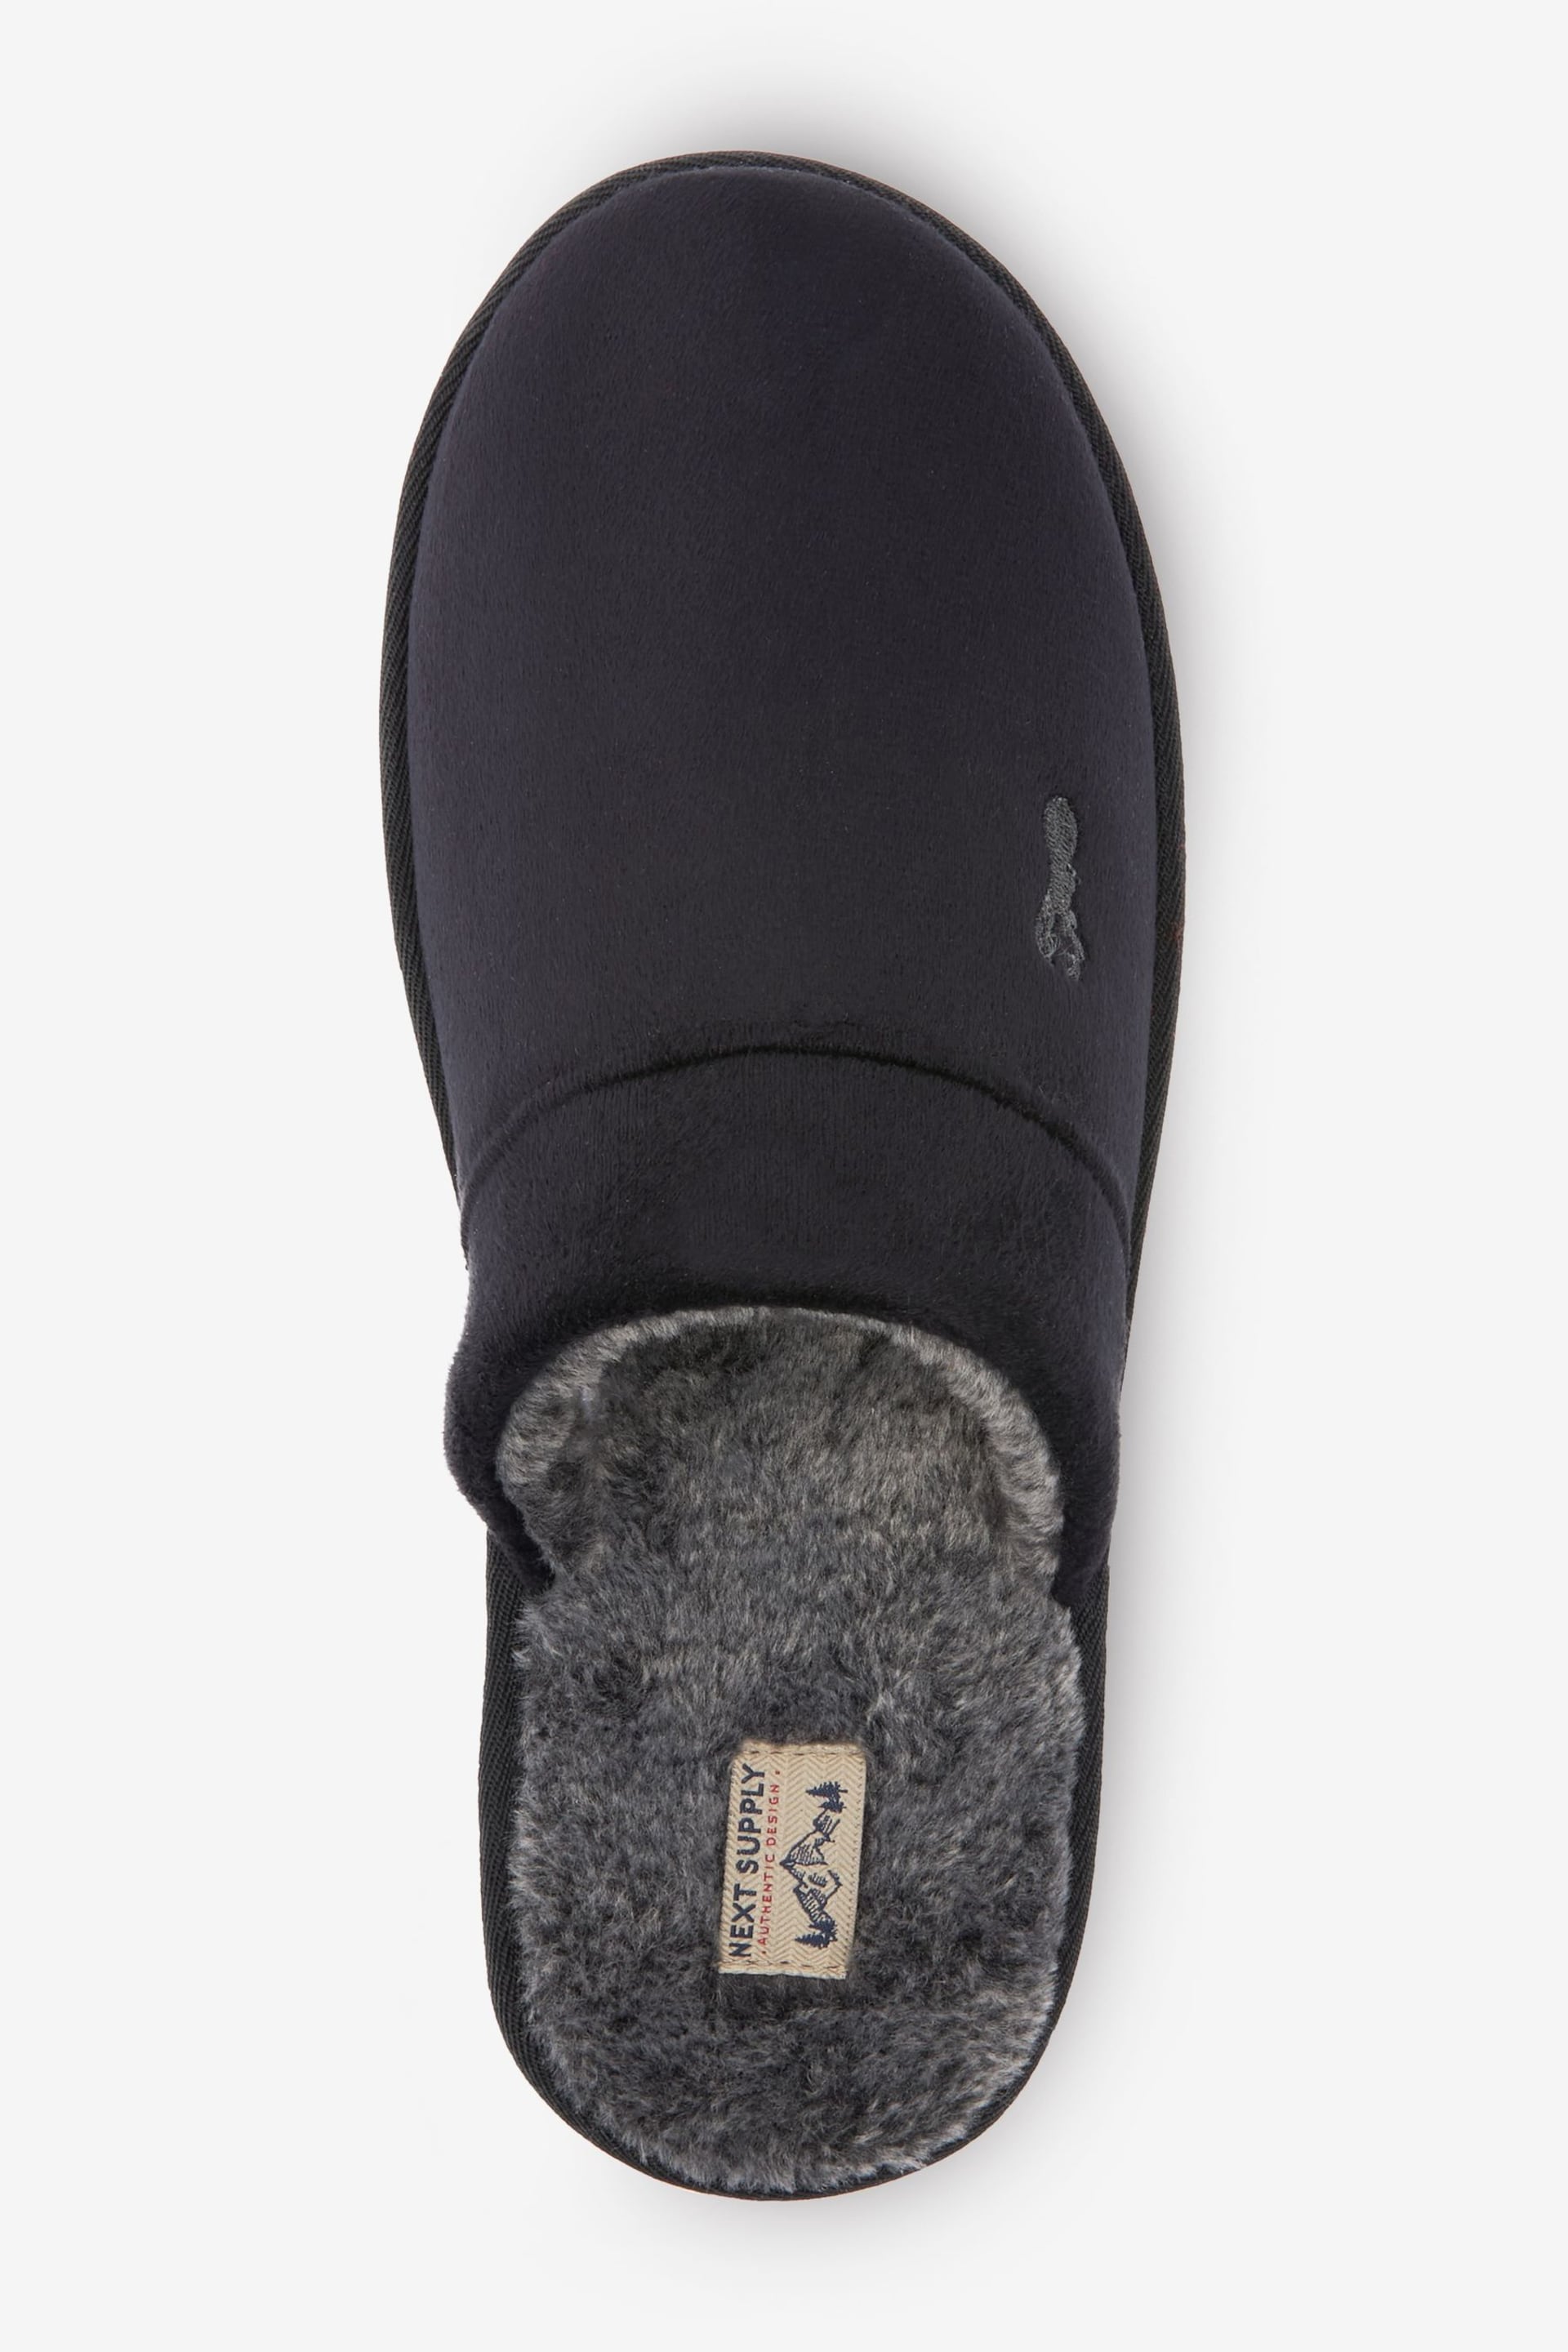 Black Stag Faux Fur Lined Mule Slippers - Image 4 of 5